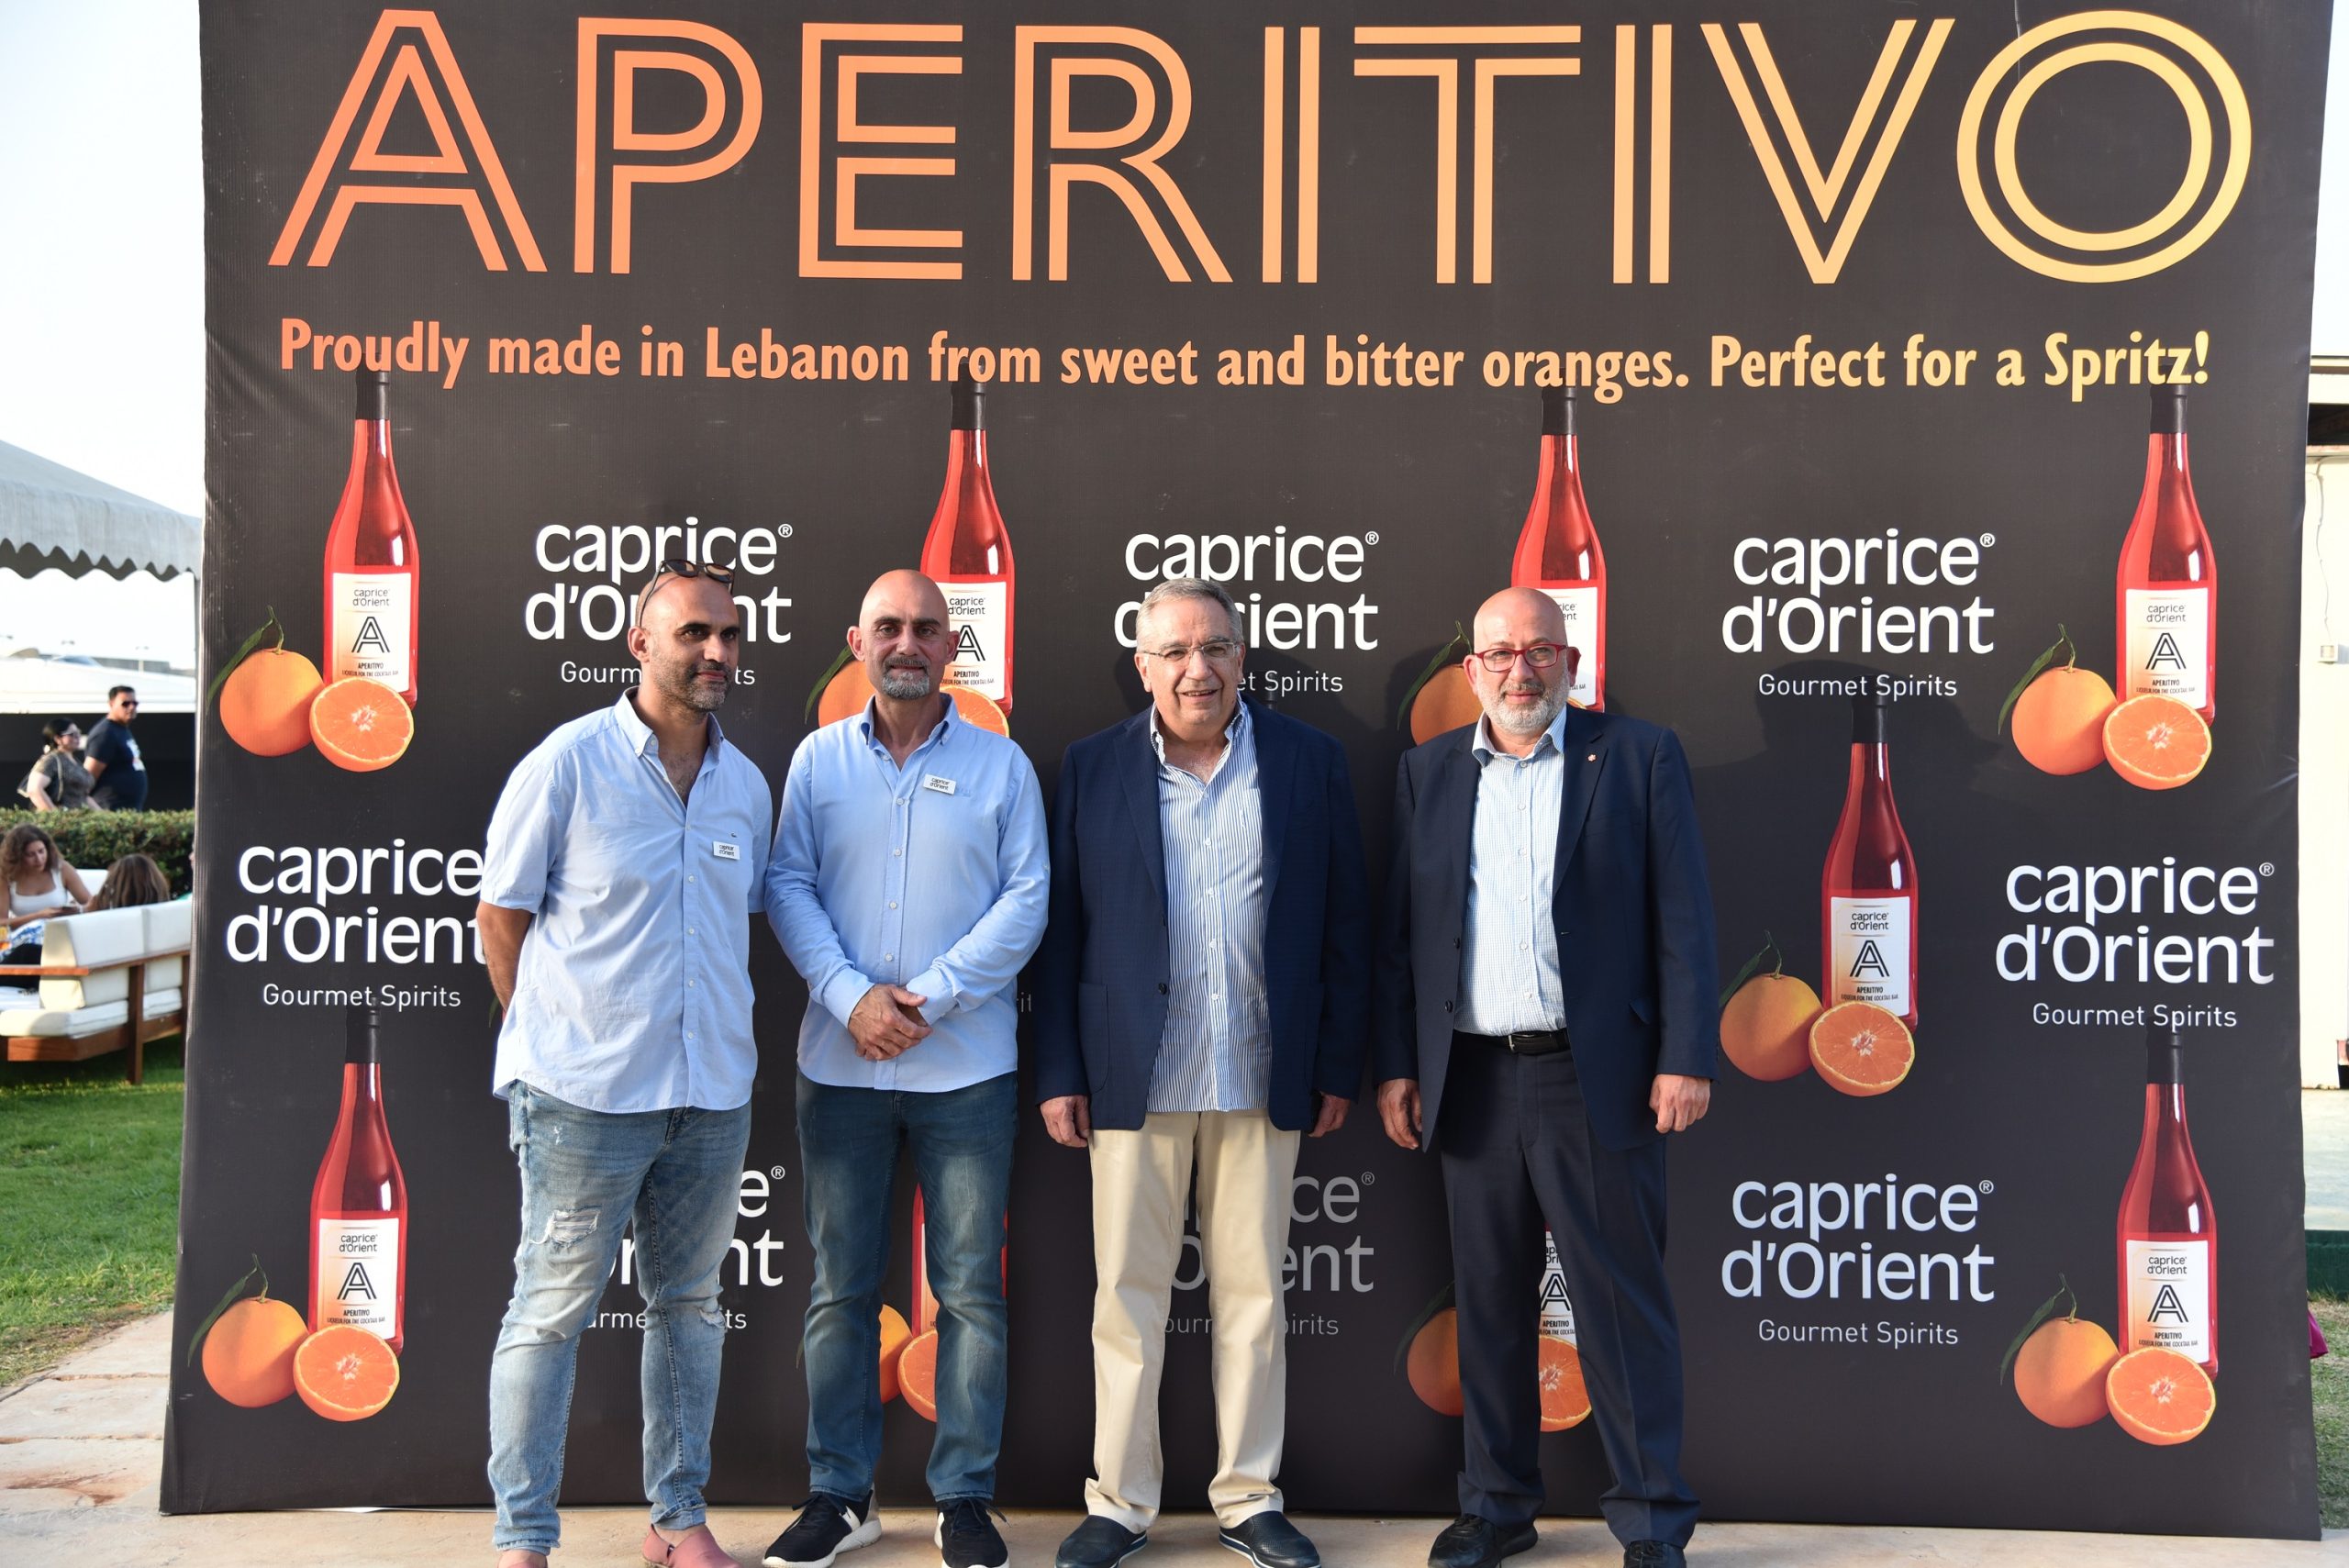 The Lebanese market stands out on once again and introduces the very first Aperol beverage made in Lebanon